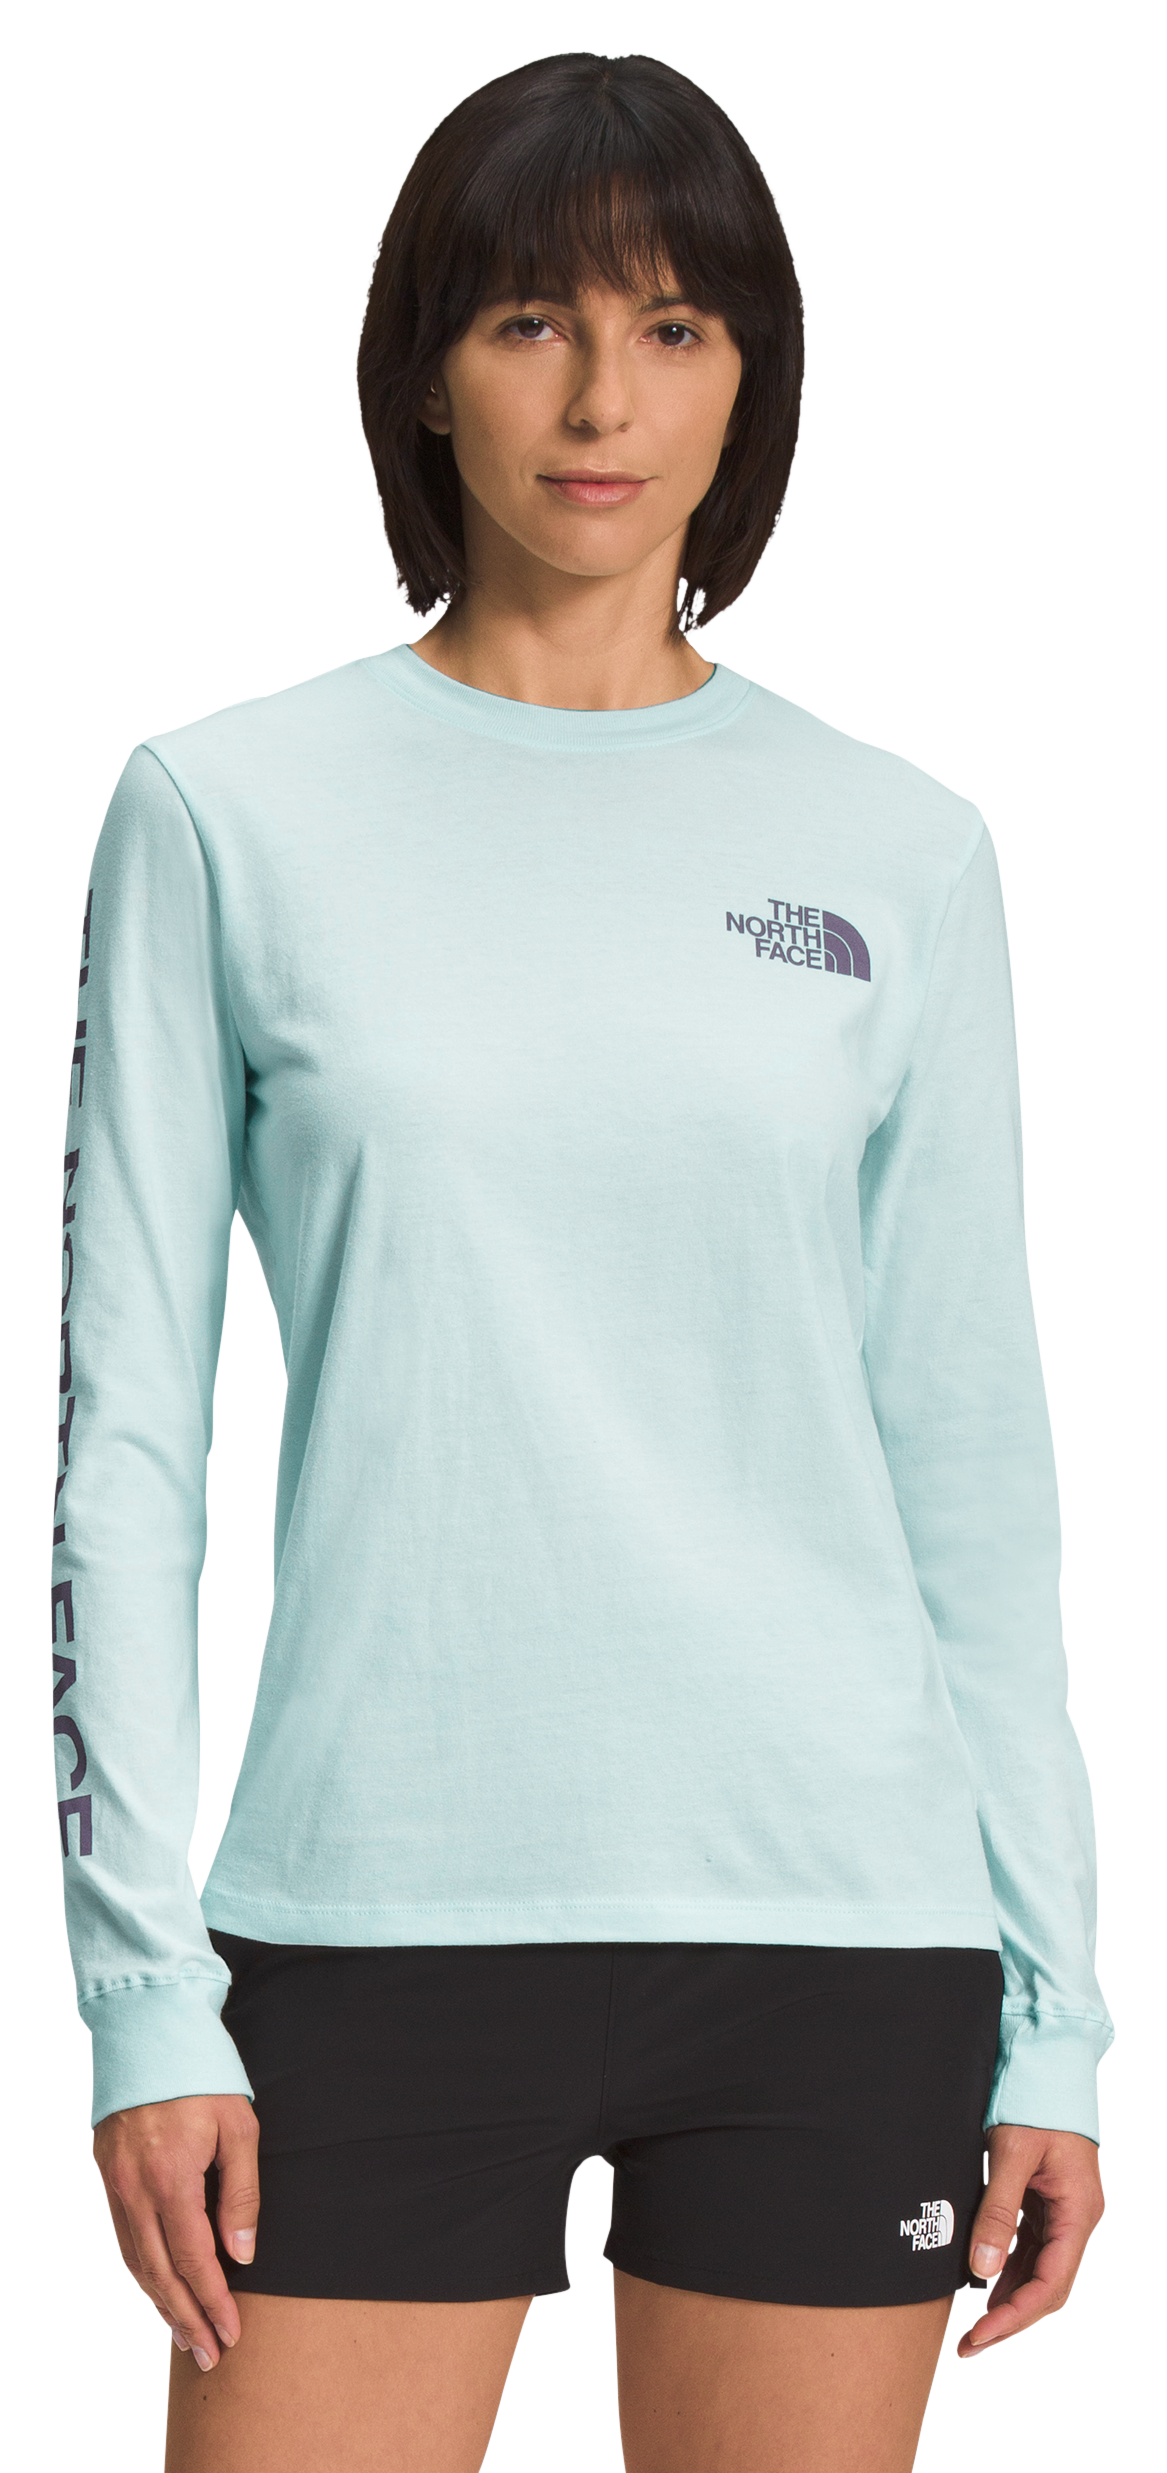 The North Face Hit Graphic Long-Sleeve T-Shirt for Ladies - Skylight Blue/Lunar Slate - XL